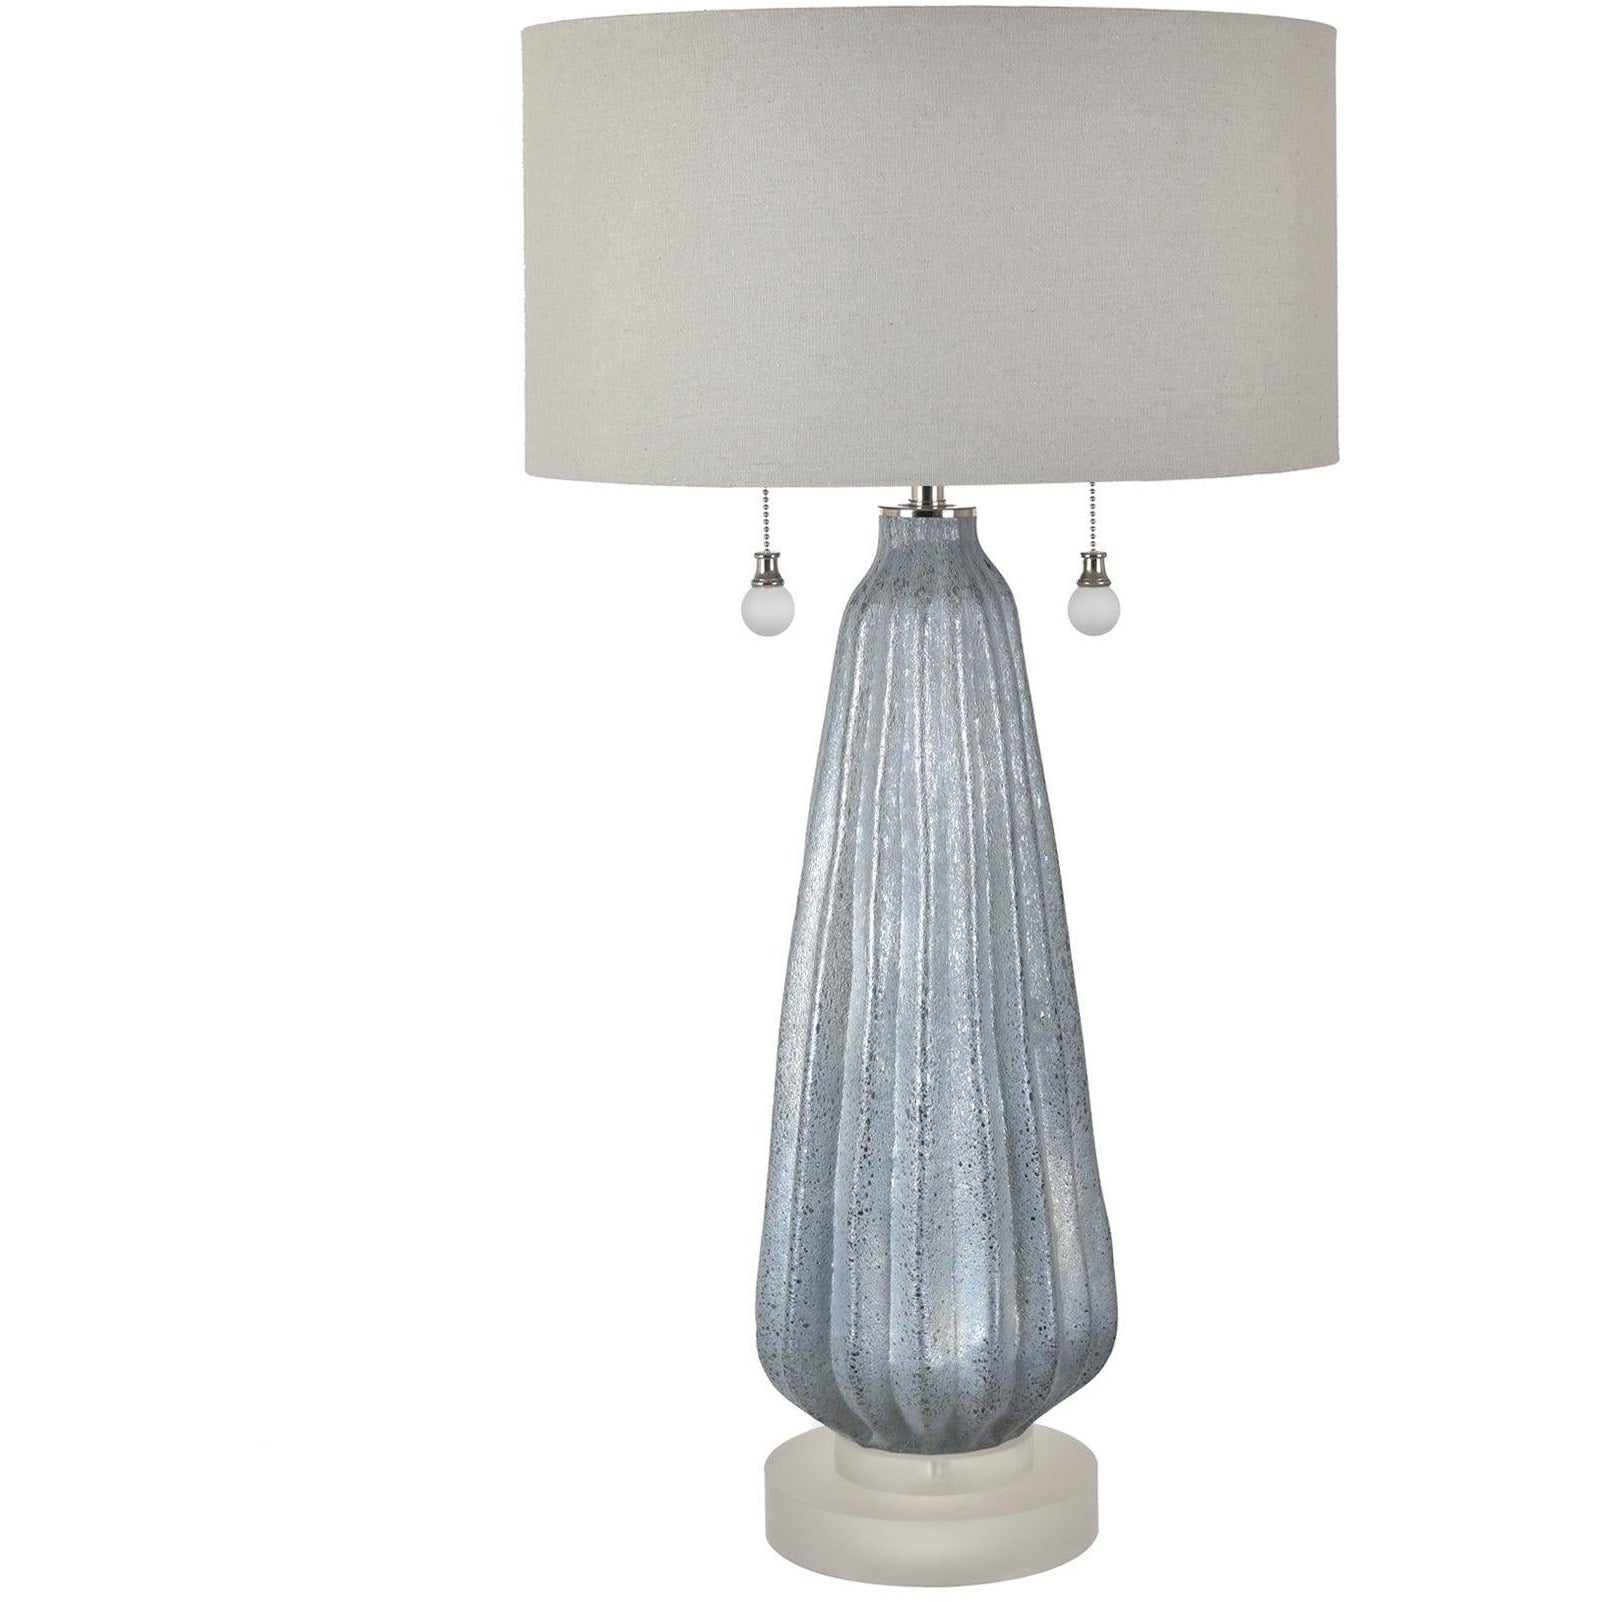 Blakely Twin Pull Chain Table Lamp